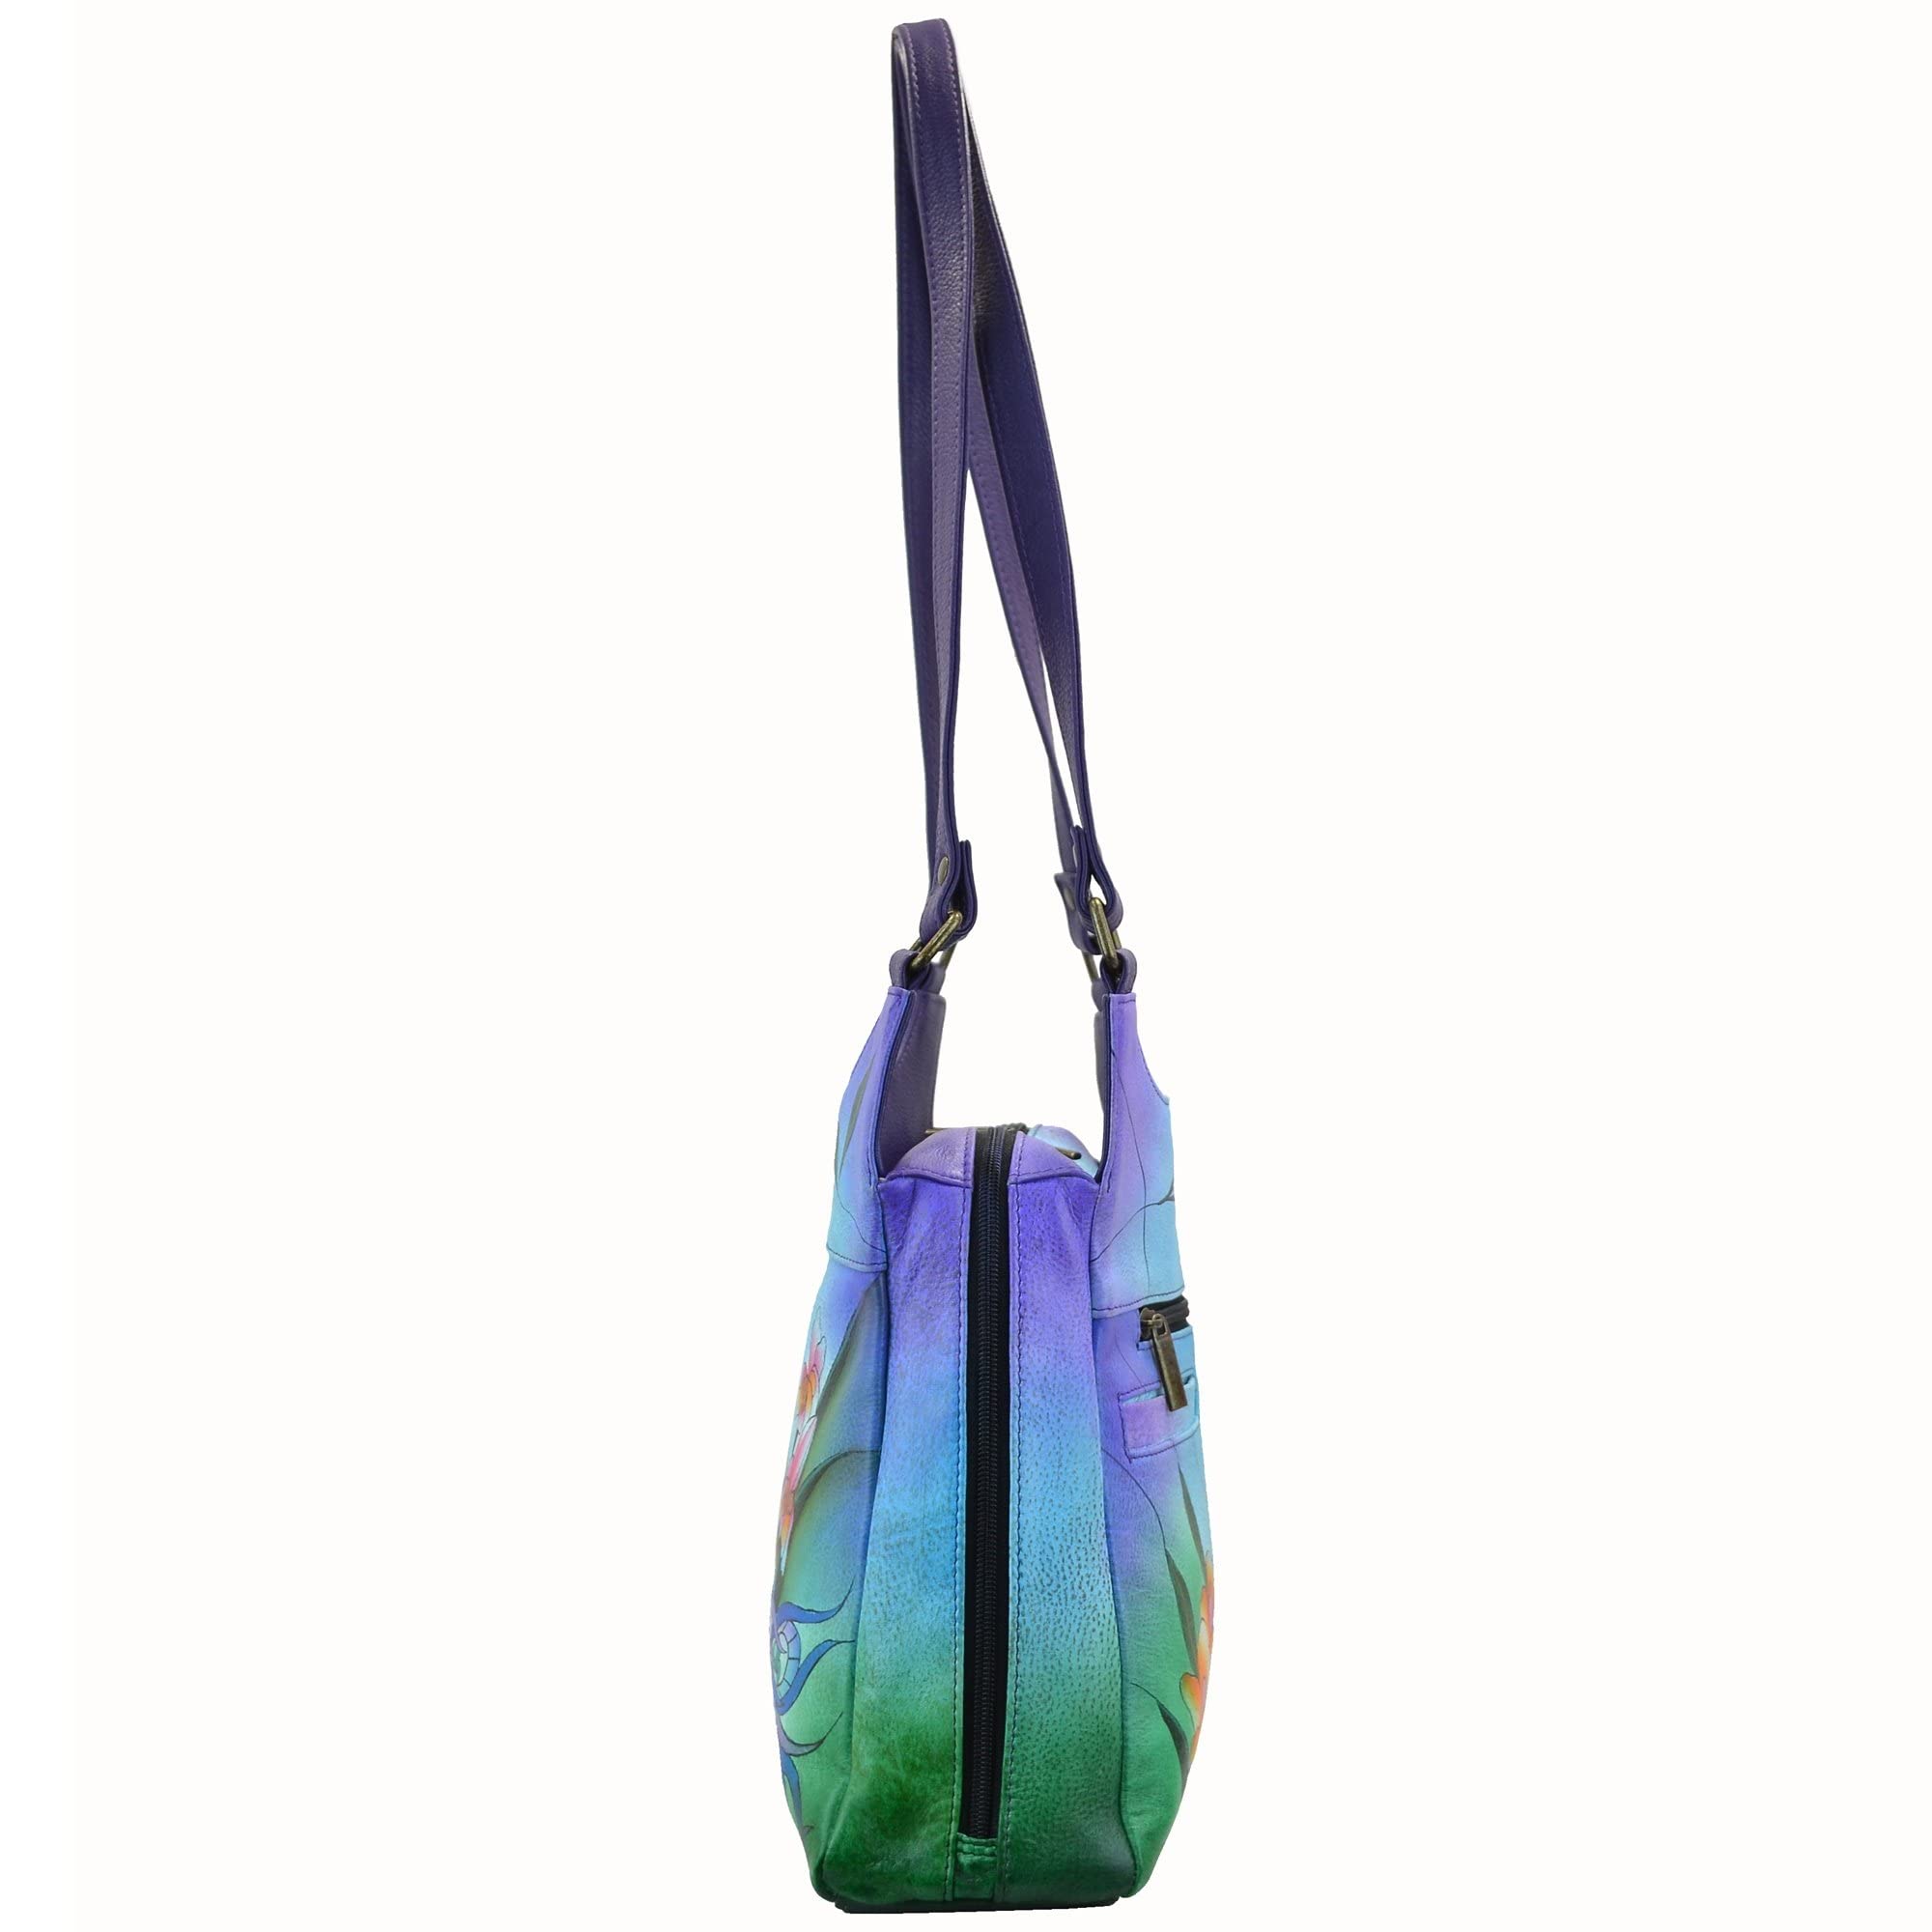 Anna by Anuschka Hand-Painted Original Artwork, Genuine Leather - Triple Compartment Satchel